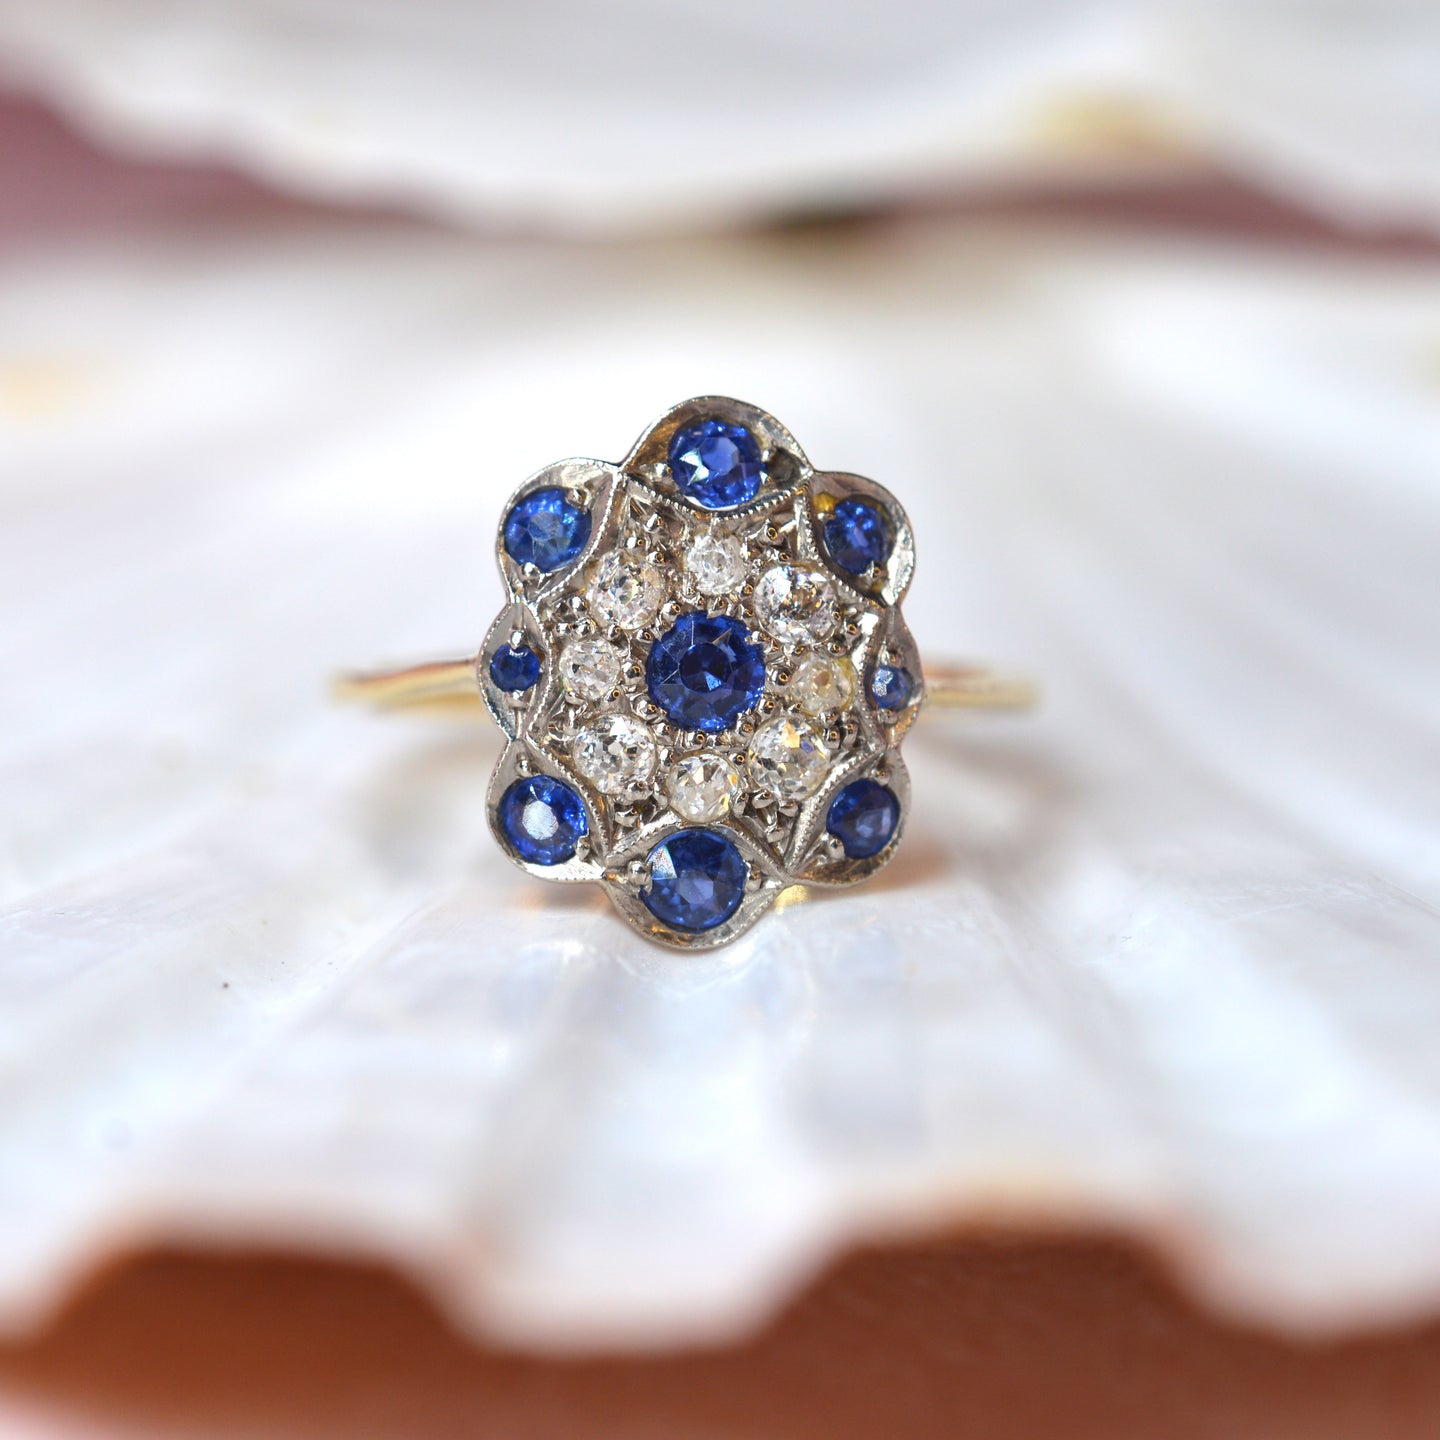 Antique Engagement Rings Buying Guide | 1stDibs: Antique and Modern  Furniture, Jewelry, Fashion & Art